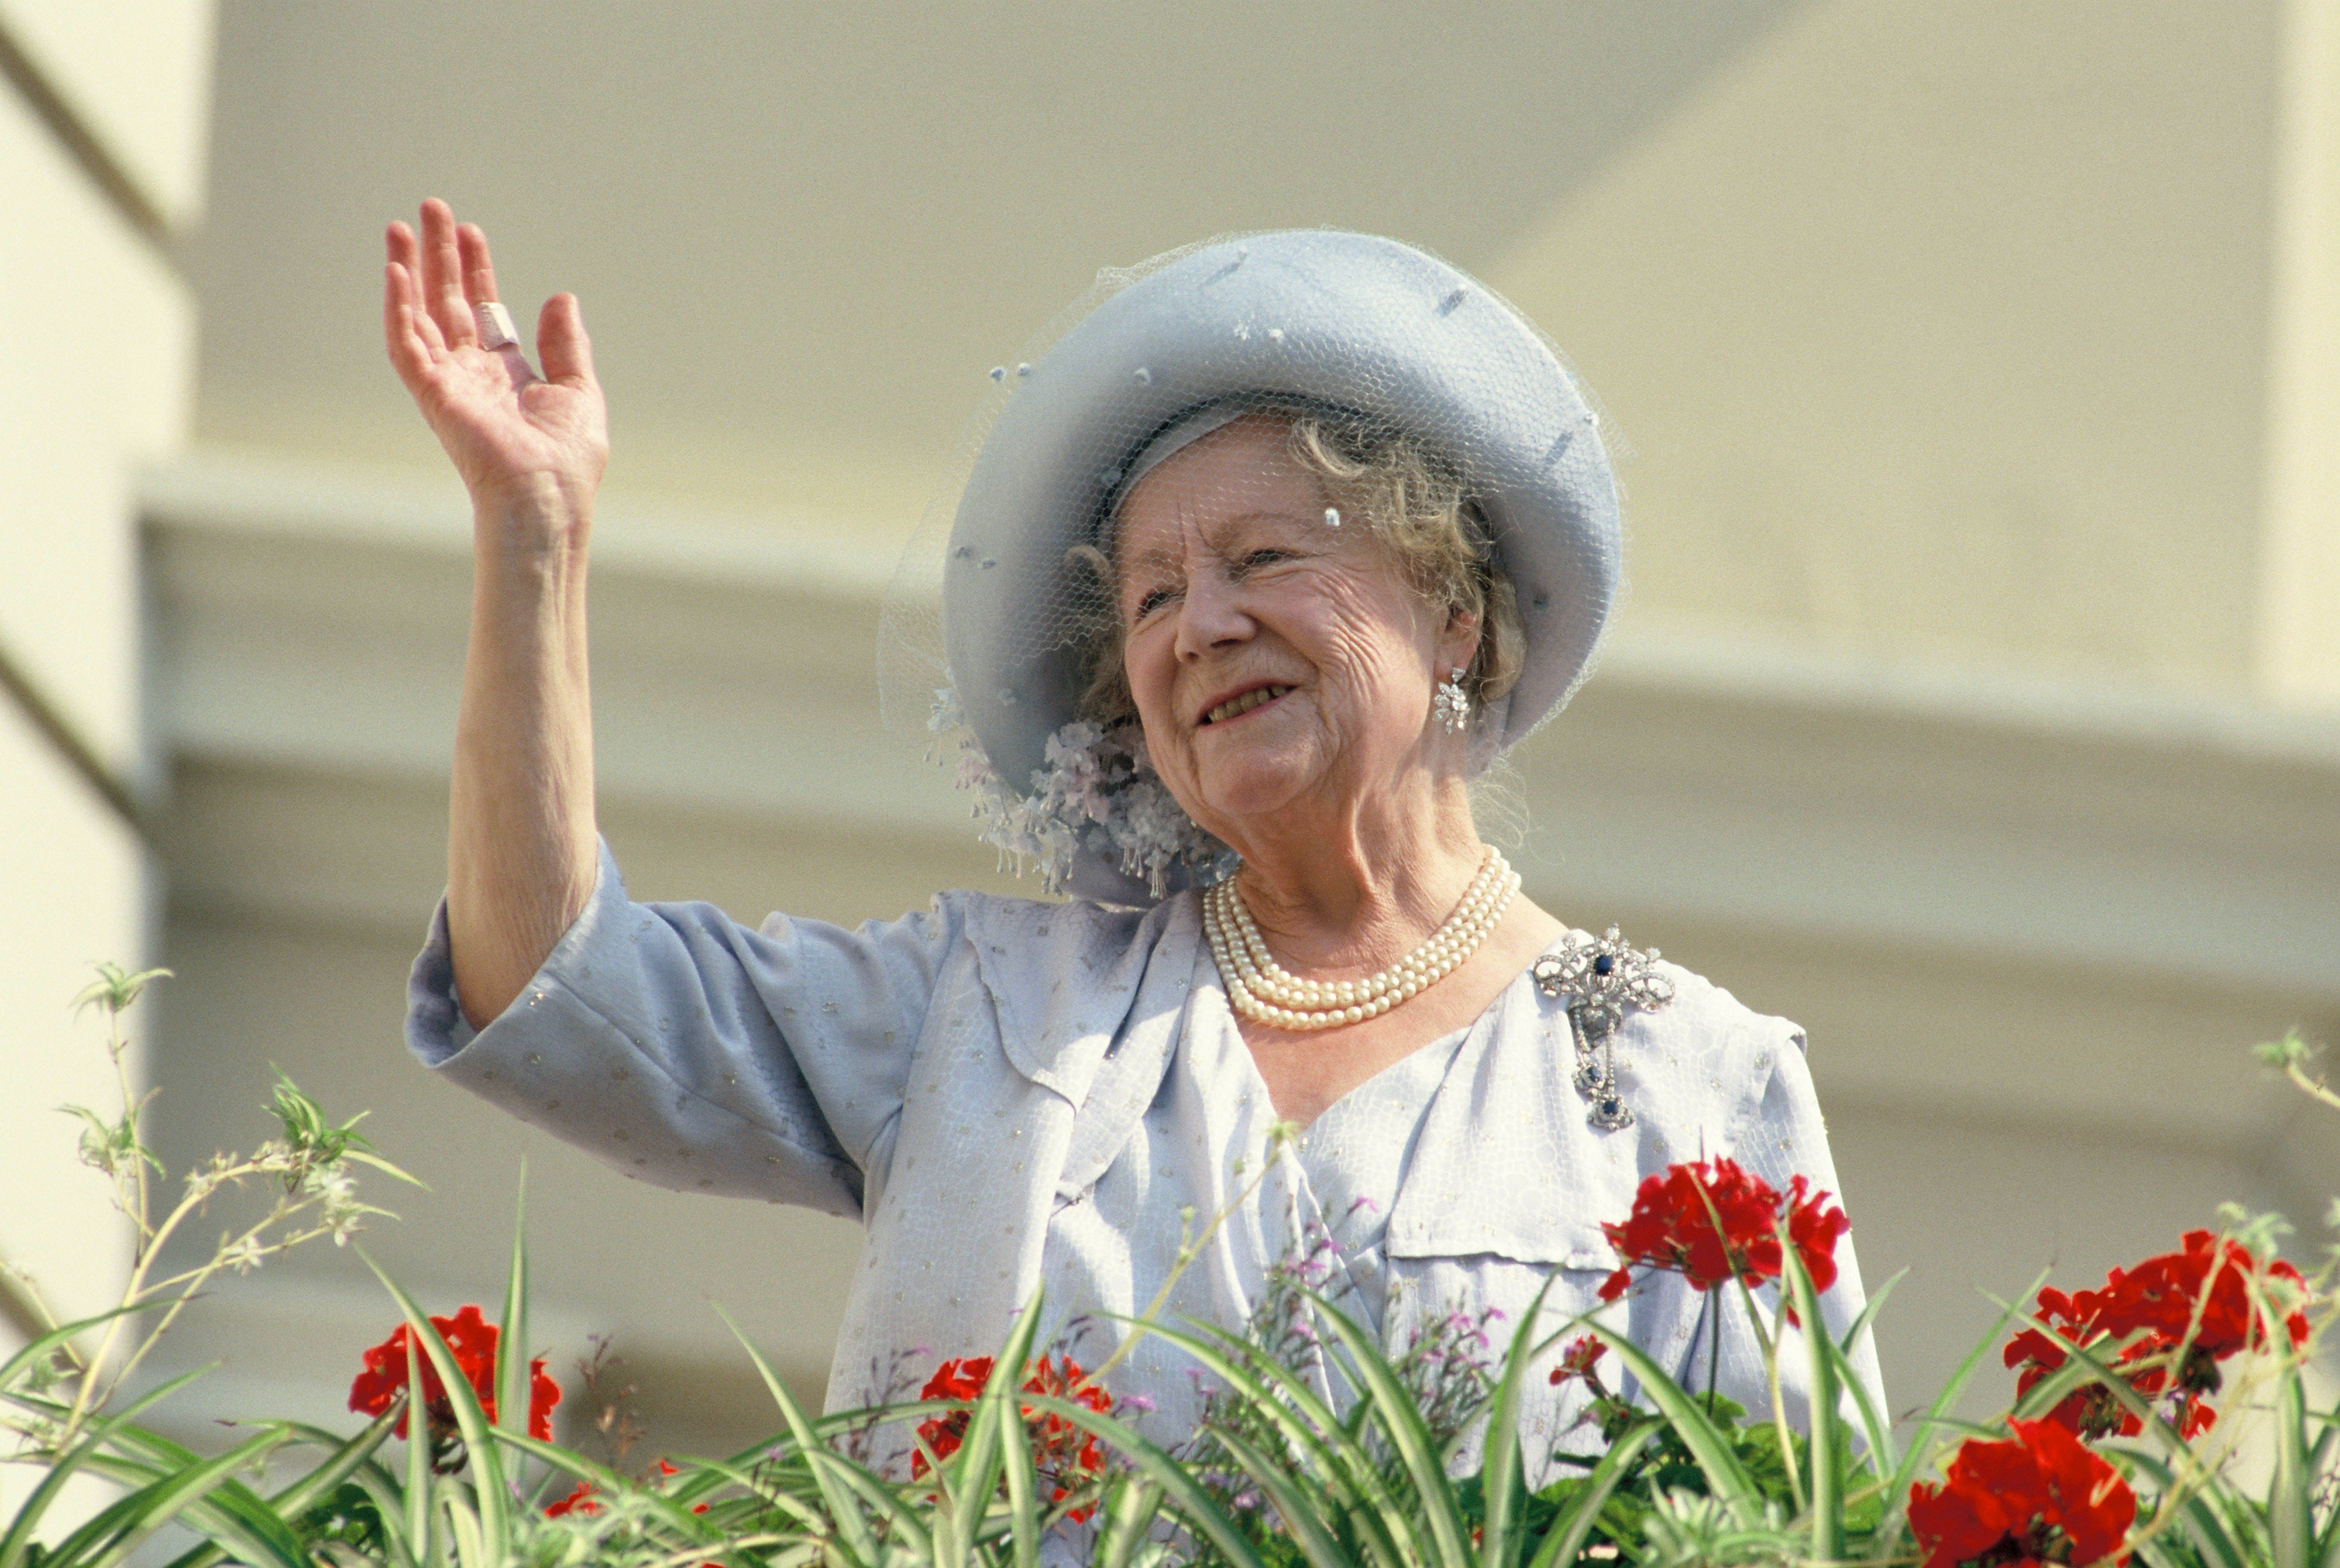 The Queen Mother waves to well-wishers during the celebration of her 90th birthday on August 4, 1990 in London, England | Source: Getty Images 